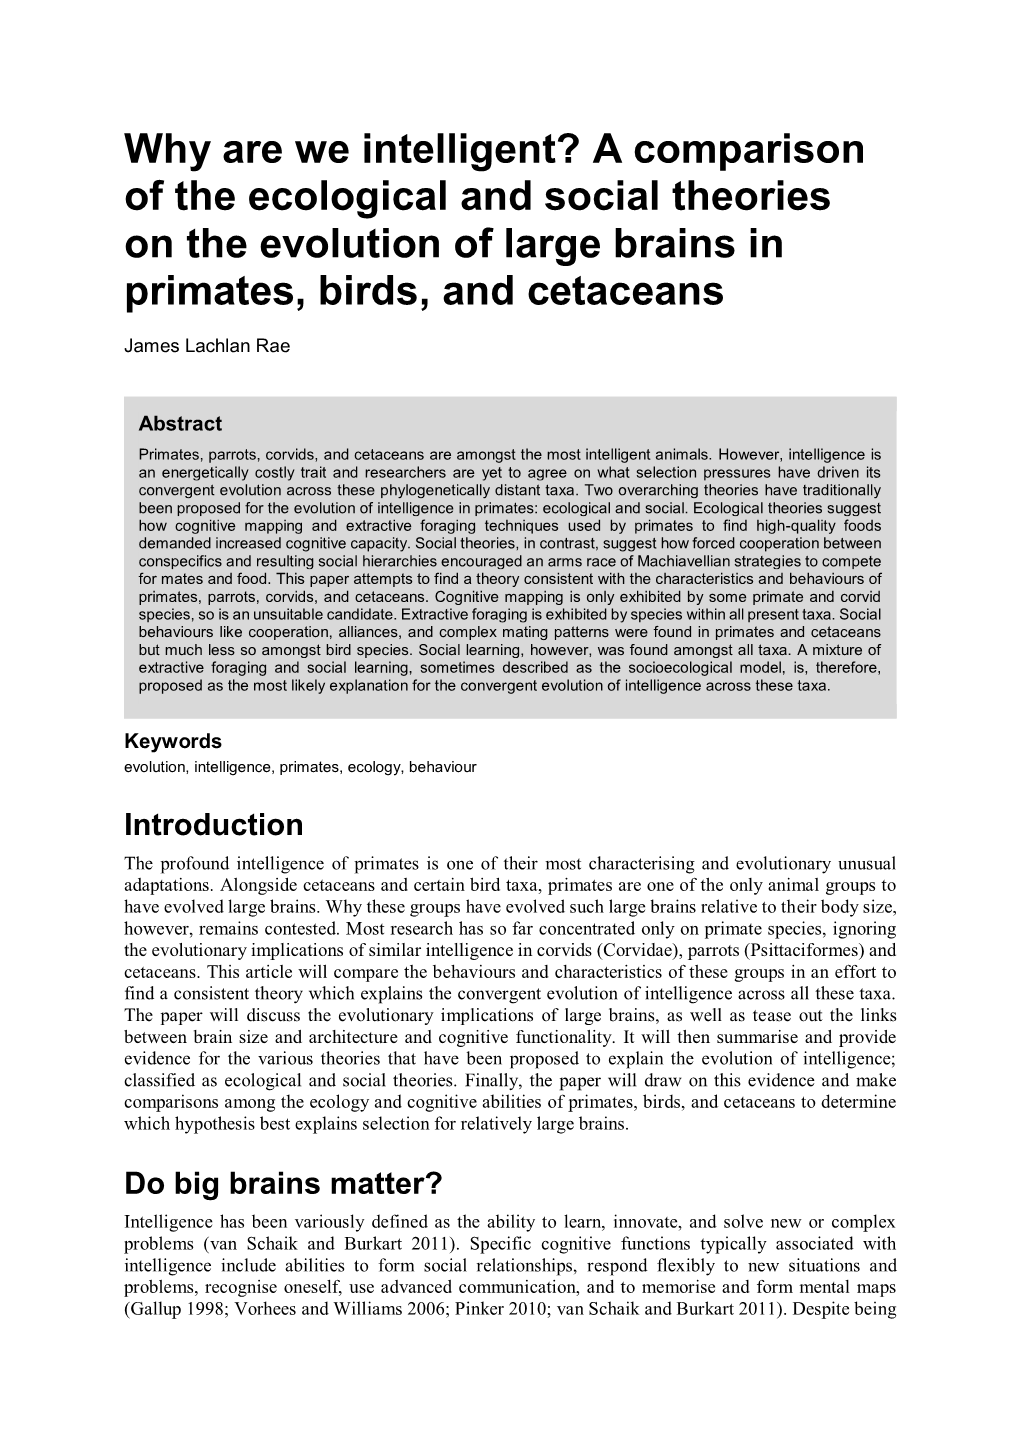 A Comparison of the Ecological and Social Theories on the Evolution of Large Brains in Primates, Birds, and Cetaceans